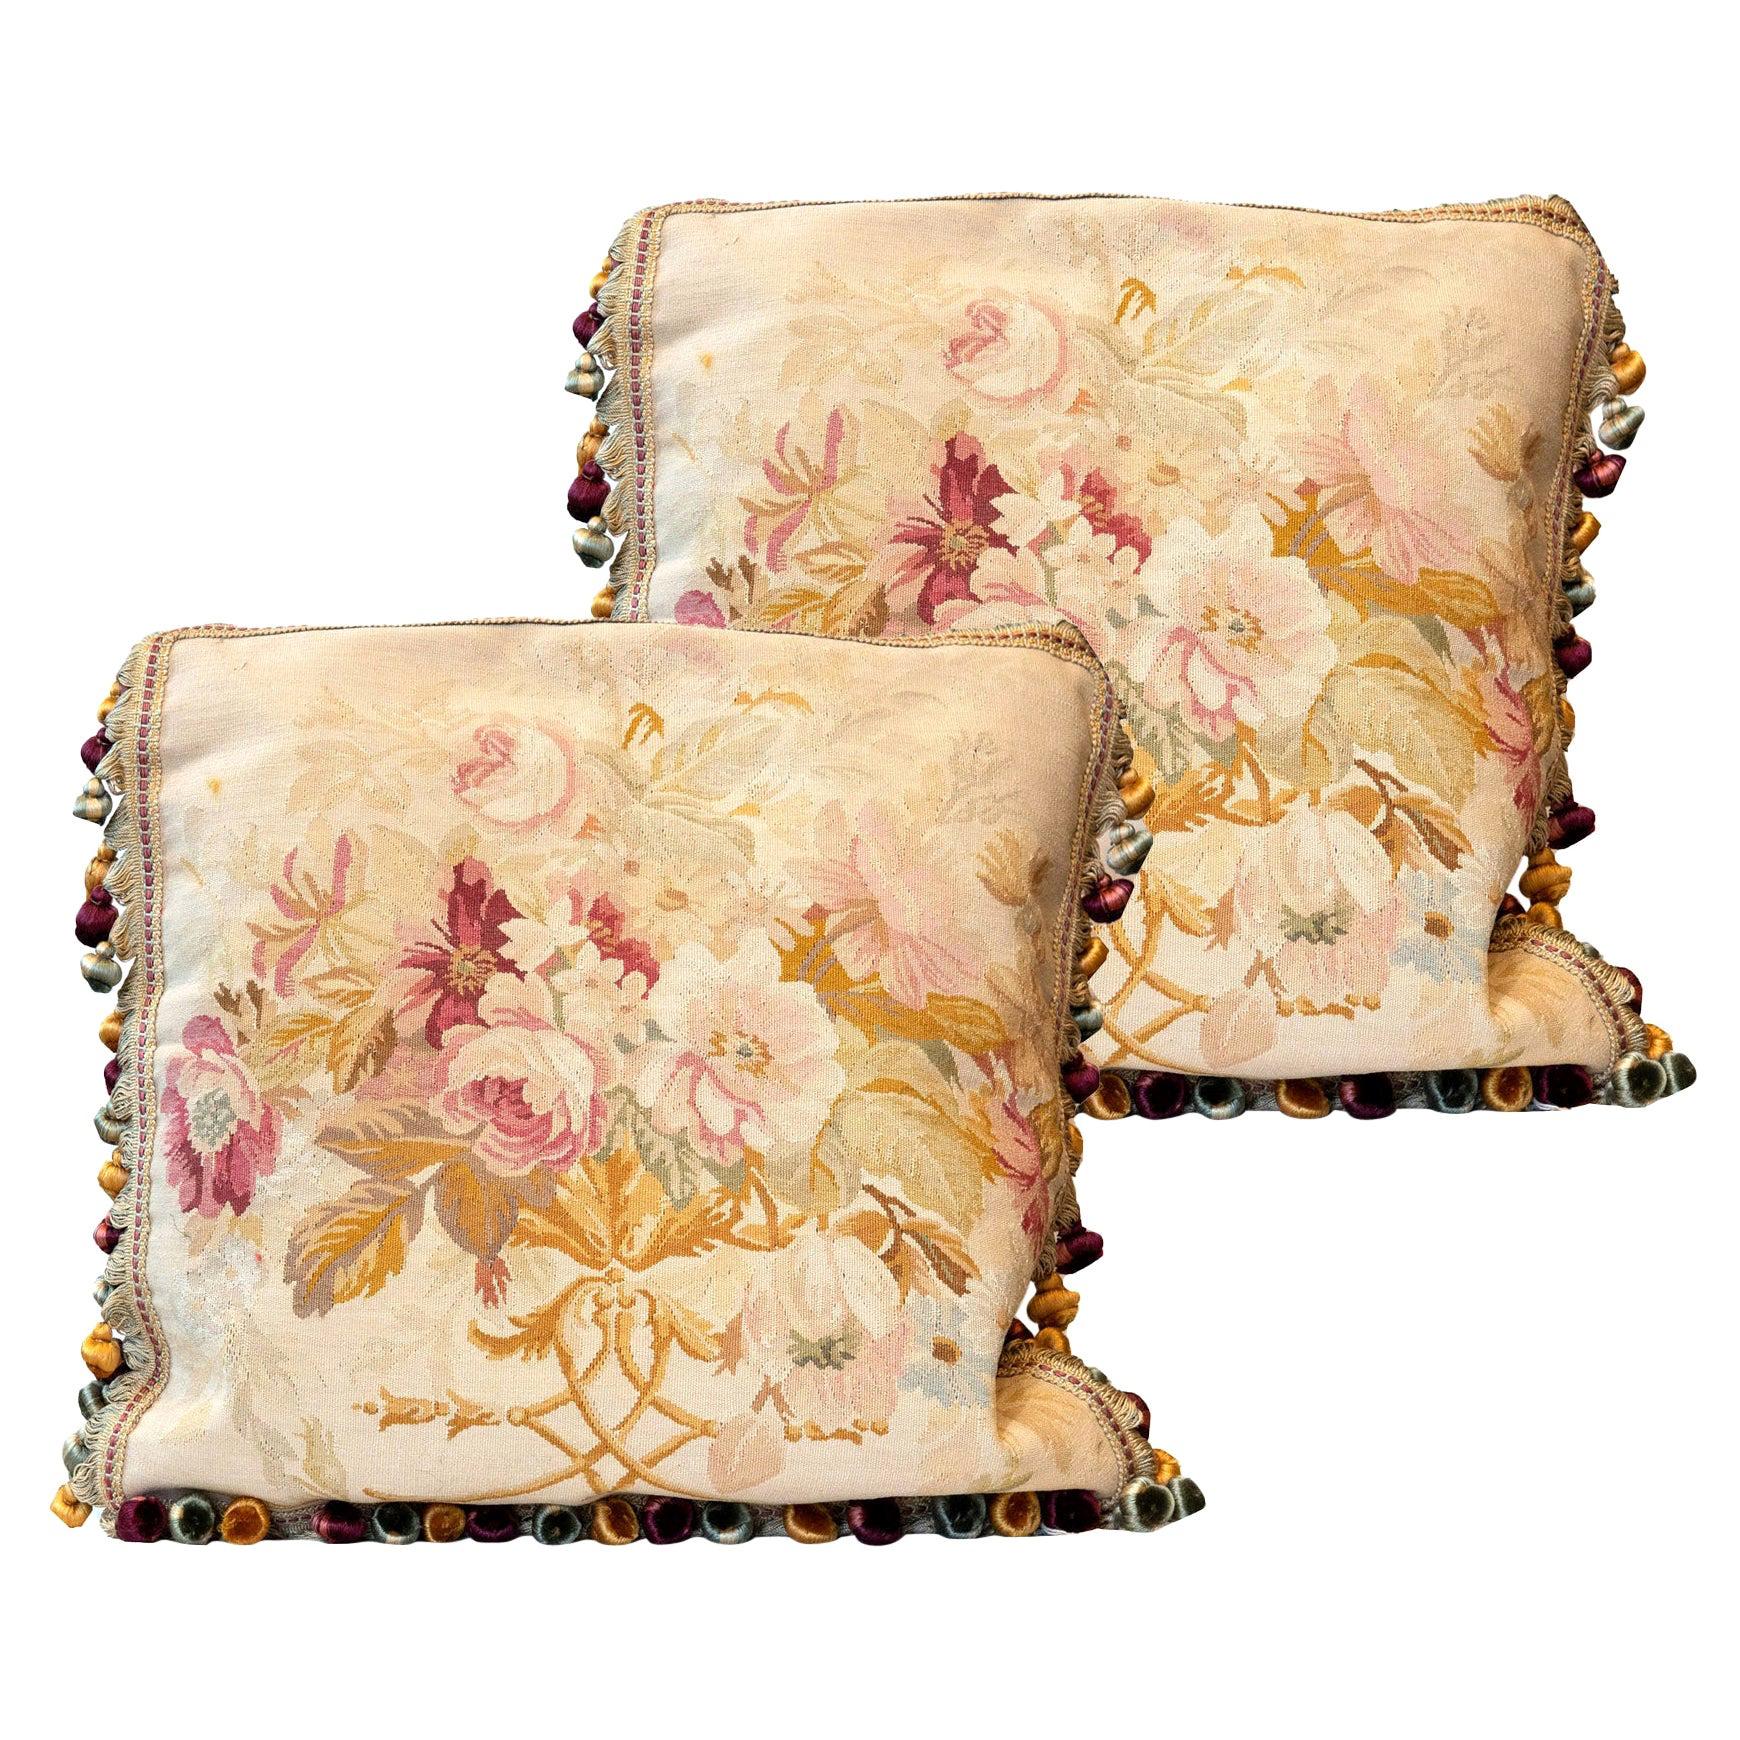 Pair of Vintage Silk-Wool Aubusson Cushion Covers Handmade Floral Pillows Cases